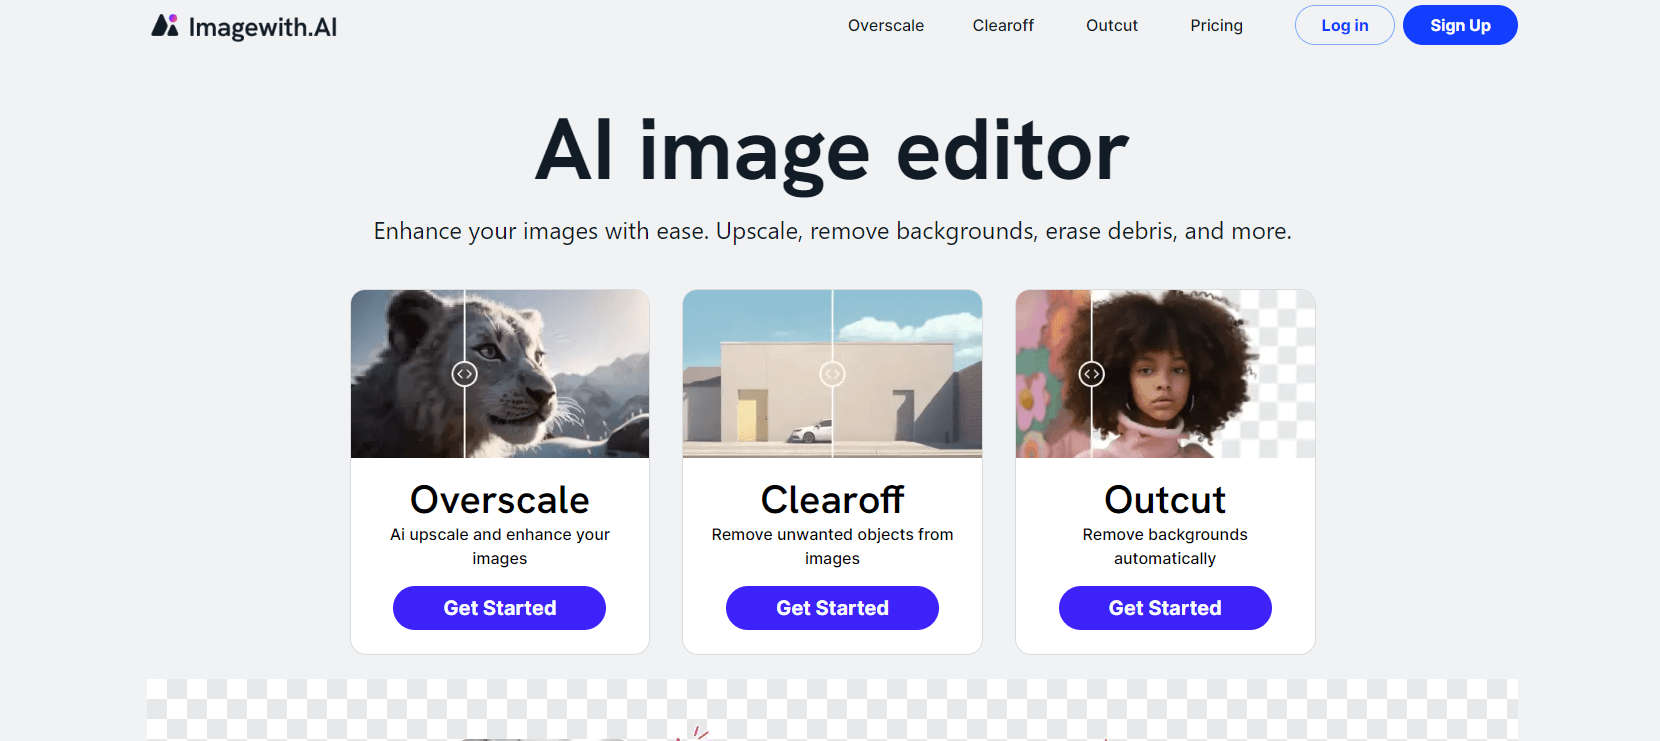 Imagewith.AI - Best Canva Alternative for AI Tools and BG Removal